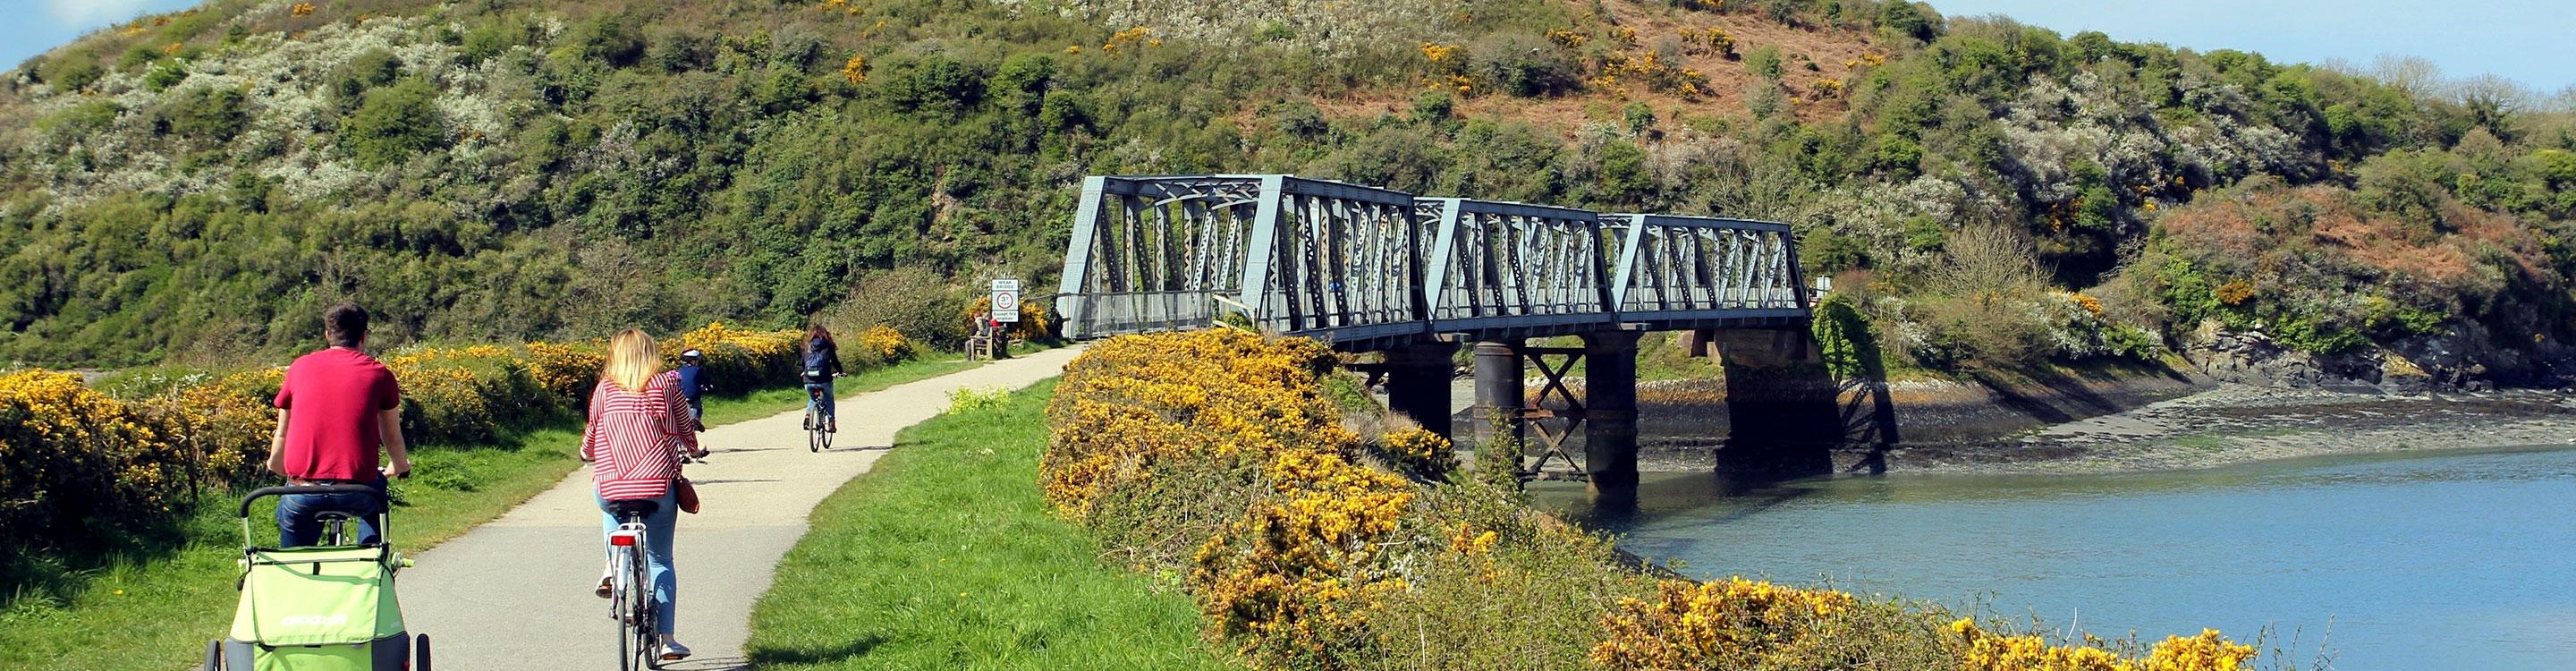 Cyclists approaching a disused iron railway bridge on the Camel Trail, near the Camel Estuary, Cornwall, UK